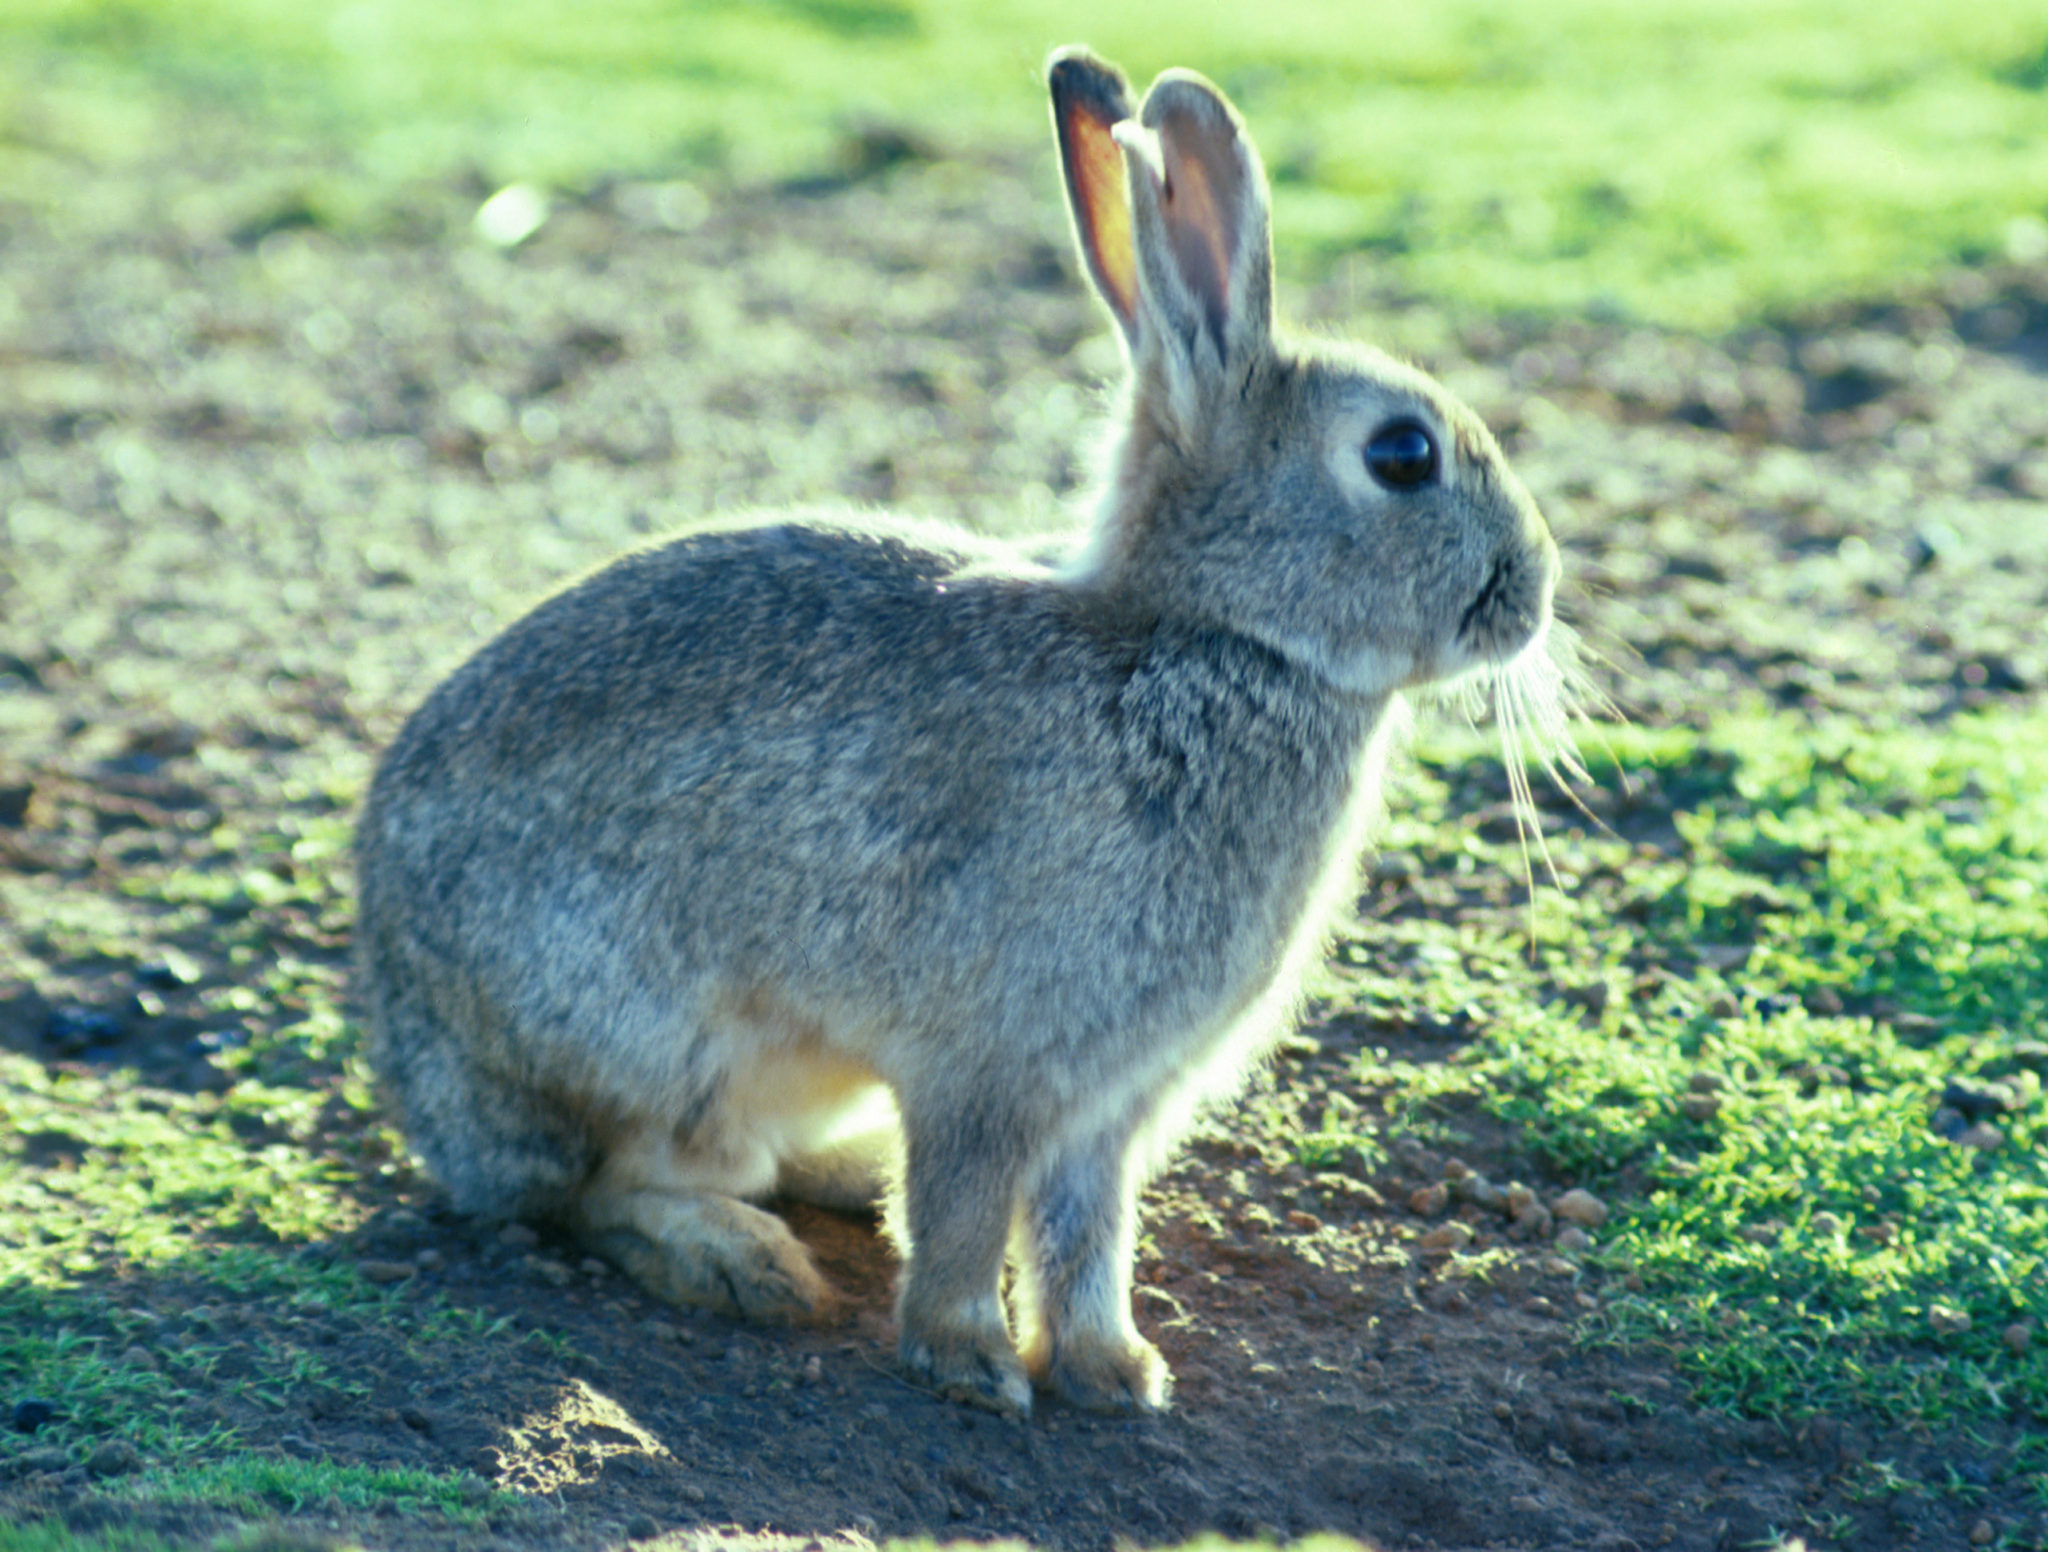 December 25 — European Rabbits Introduced To Australia 1859 Today